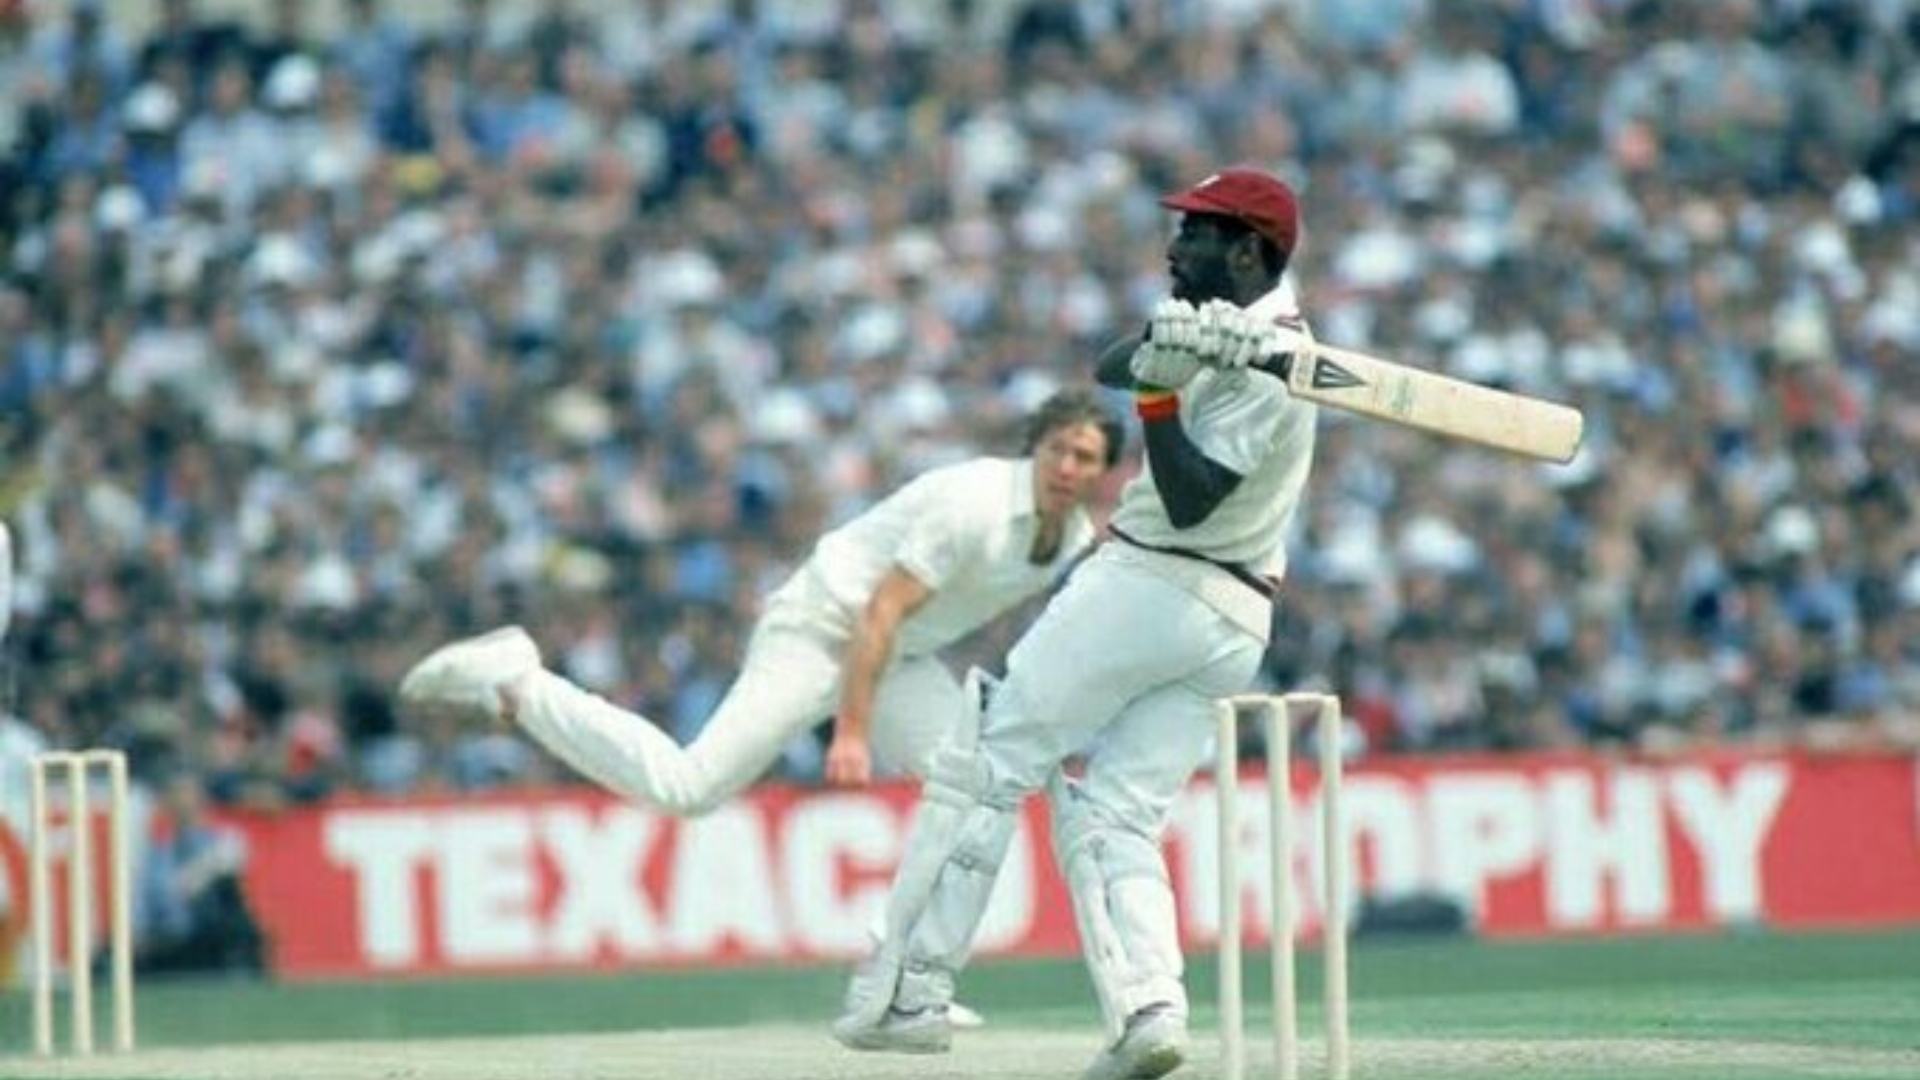 Sir Vivian Richards blasted a magnificent century off just 56 balls as West Indies whitewashed England 5-0.